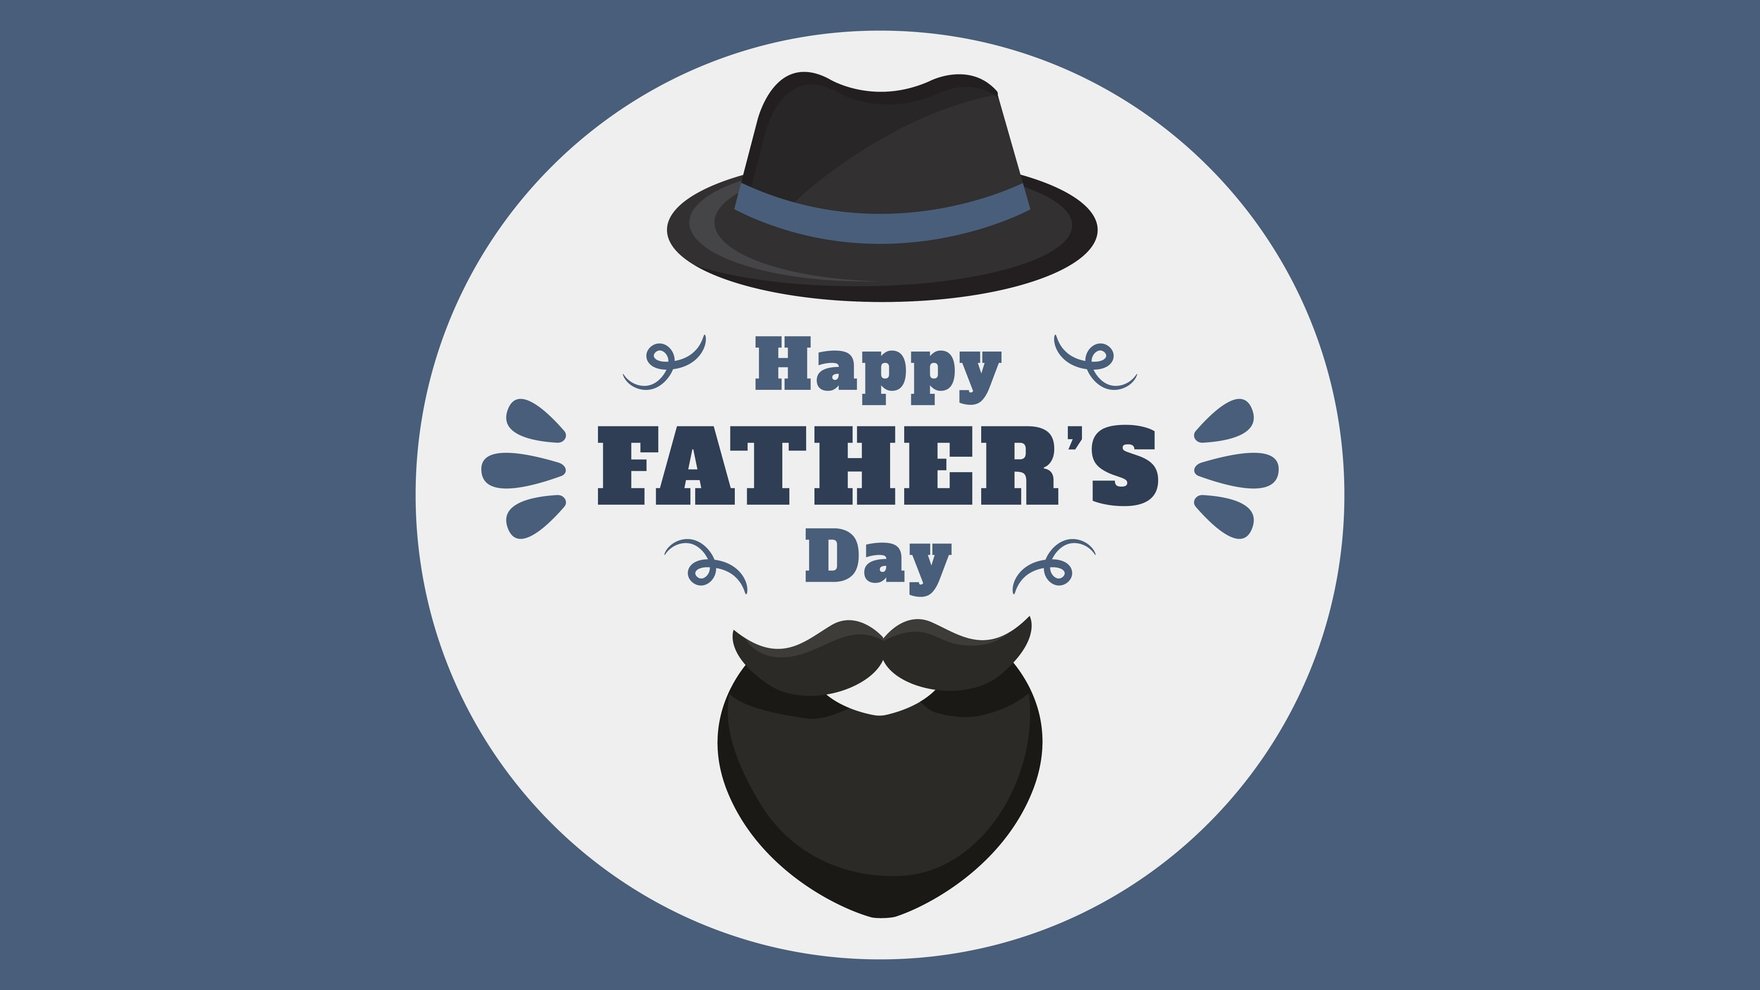 Free Simple Father's Day Background in Illustrator, EPS, SVG, JPG, PNG